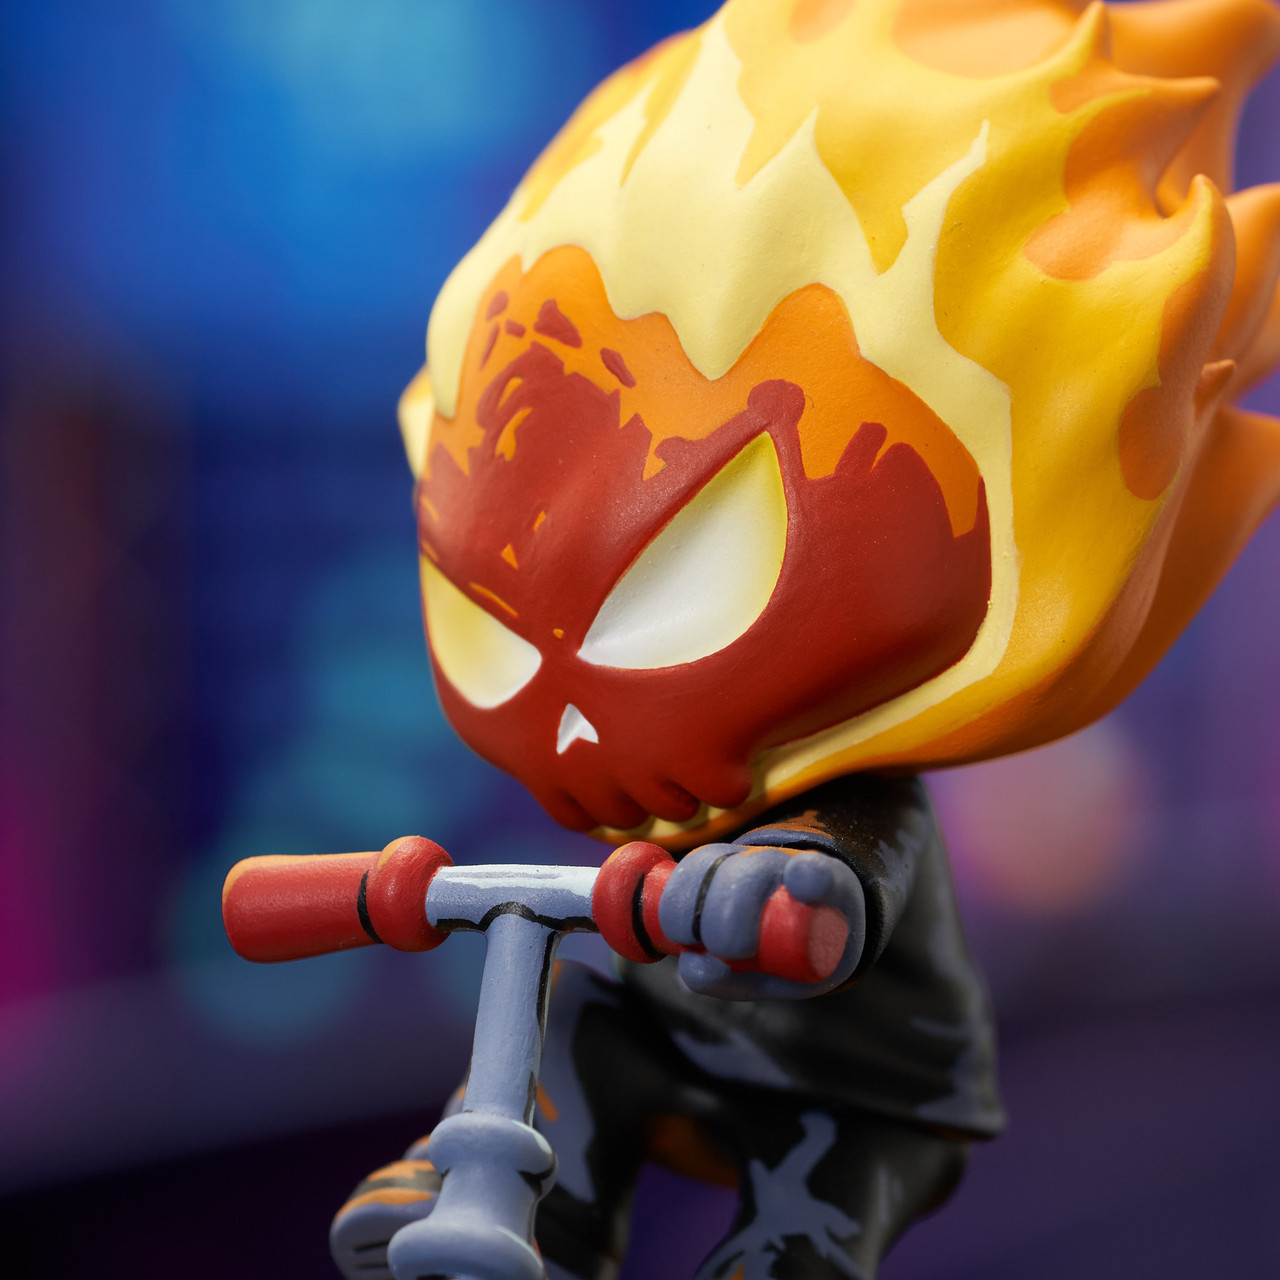 Marvel Animated Style Ghost Rider Statue - Entertainment Earth